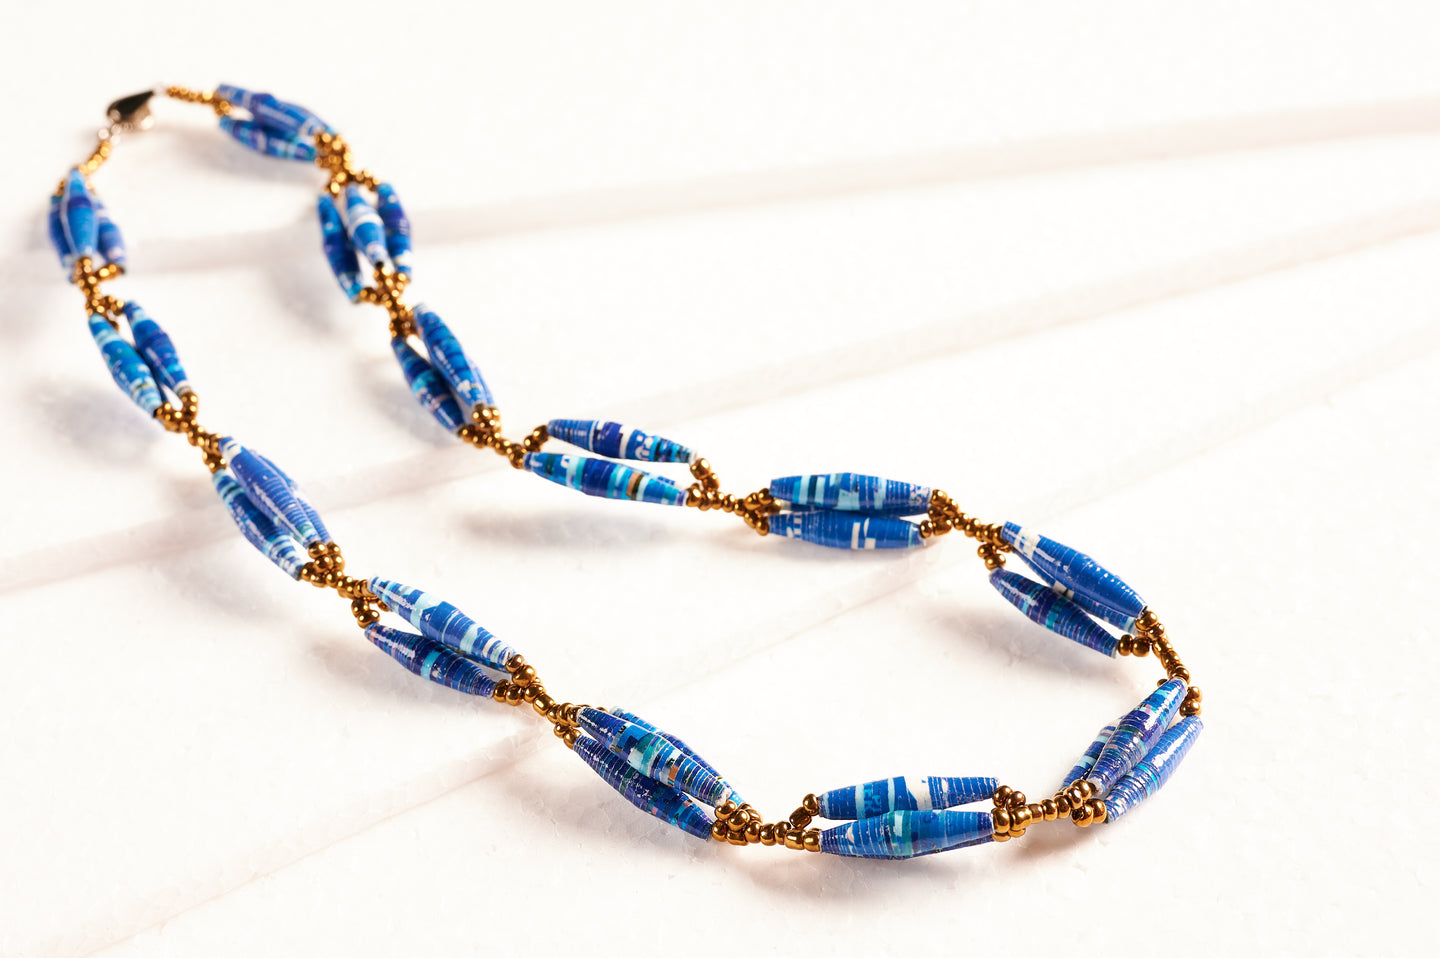 Short necklace with elongated paper beads in bundles 